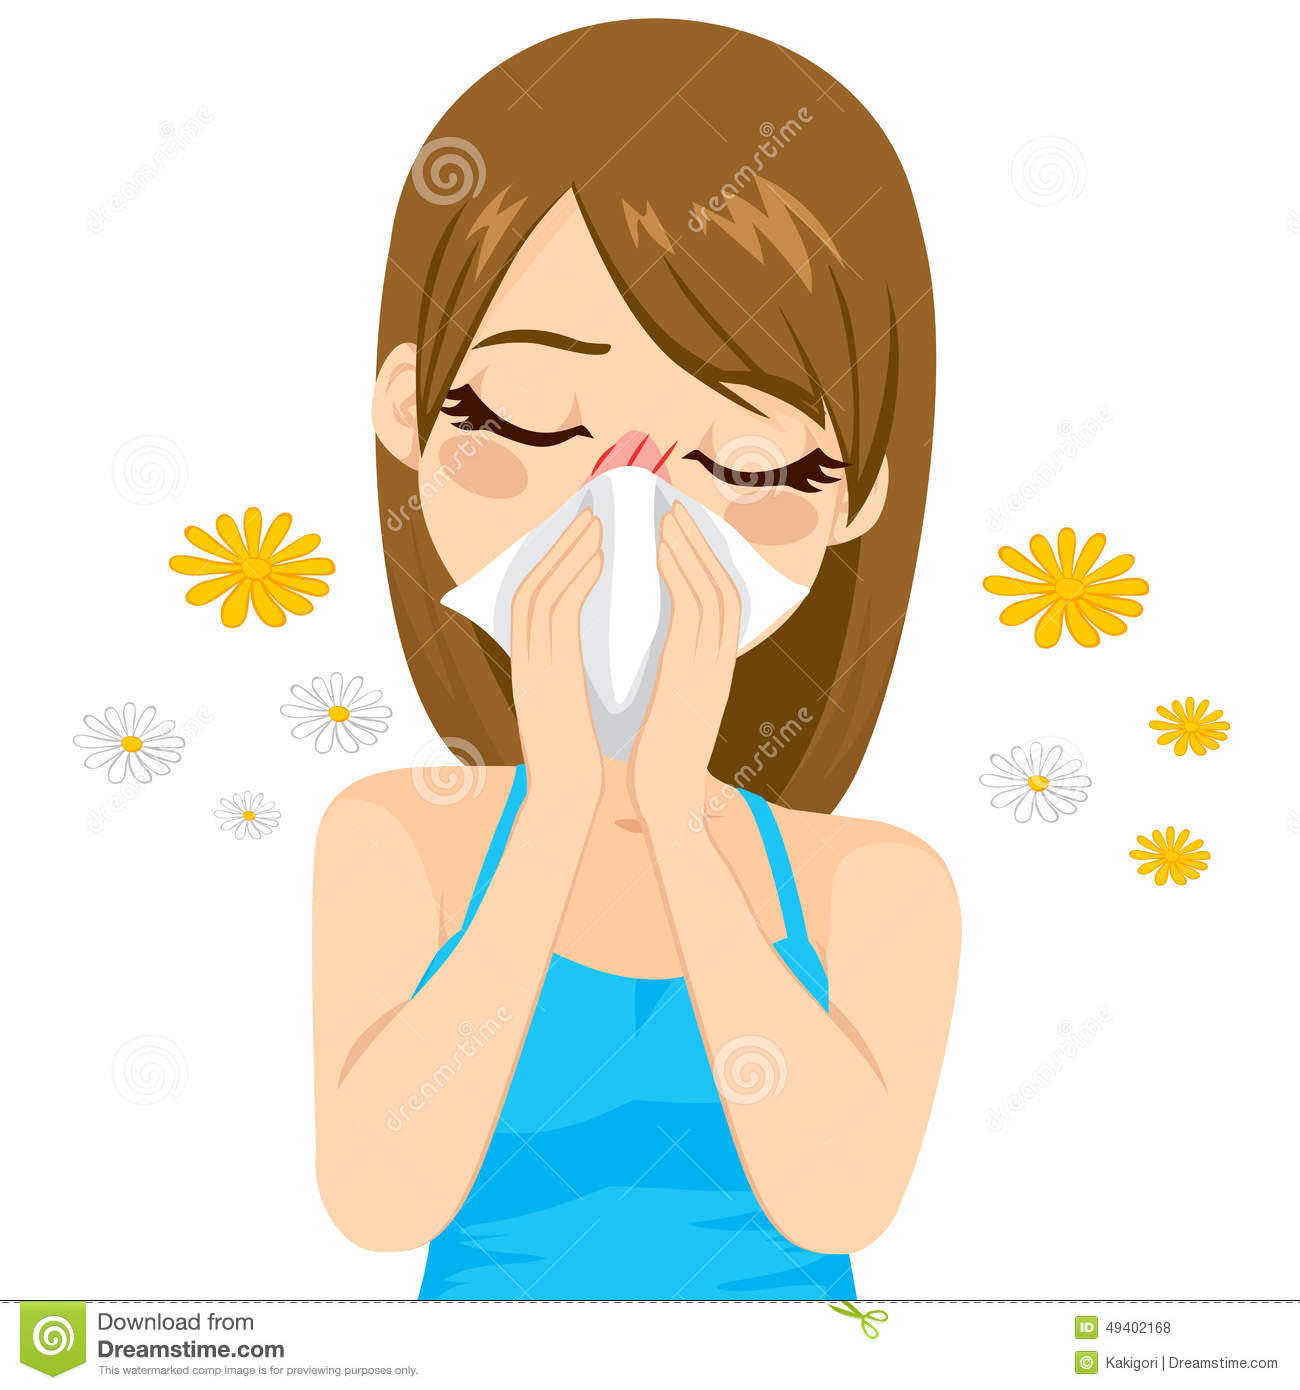 Allergies clipart - Clipground